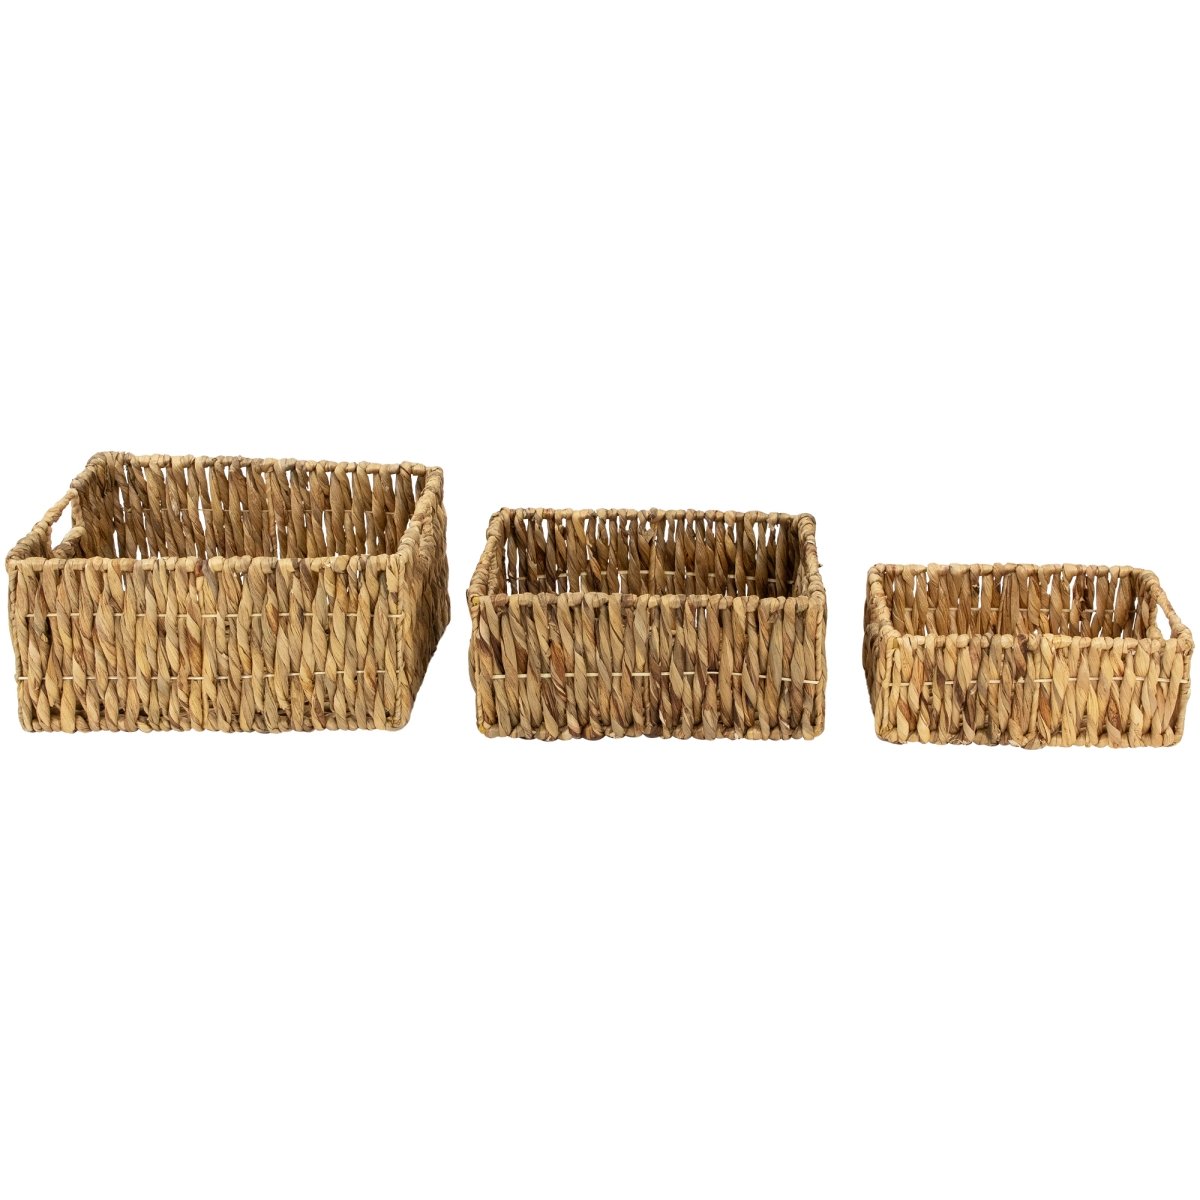 Picture of Northlight 35737398 15.75 in. Brown Water Hyacinth Woven Storage Baskets with Built-in Handles - Set of 3